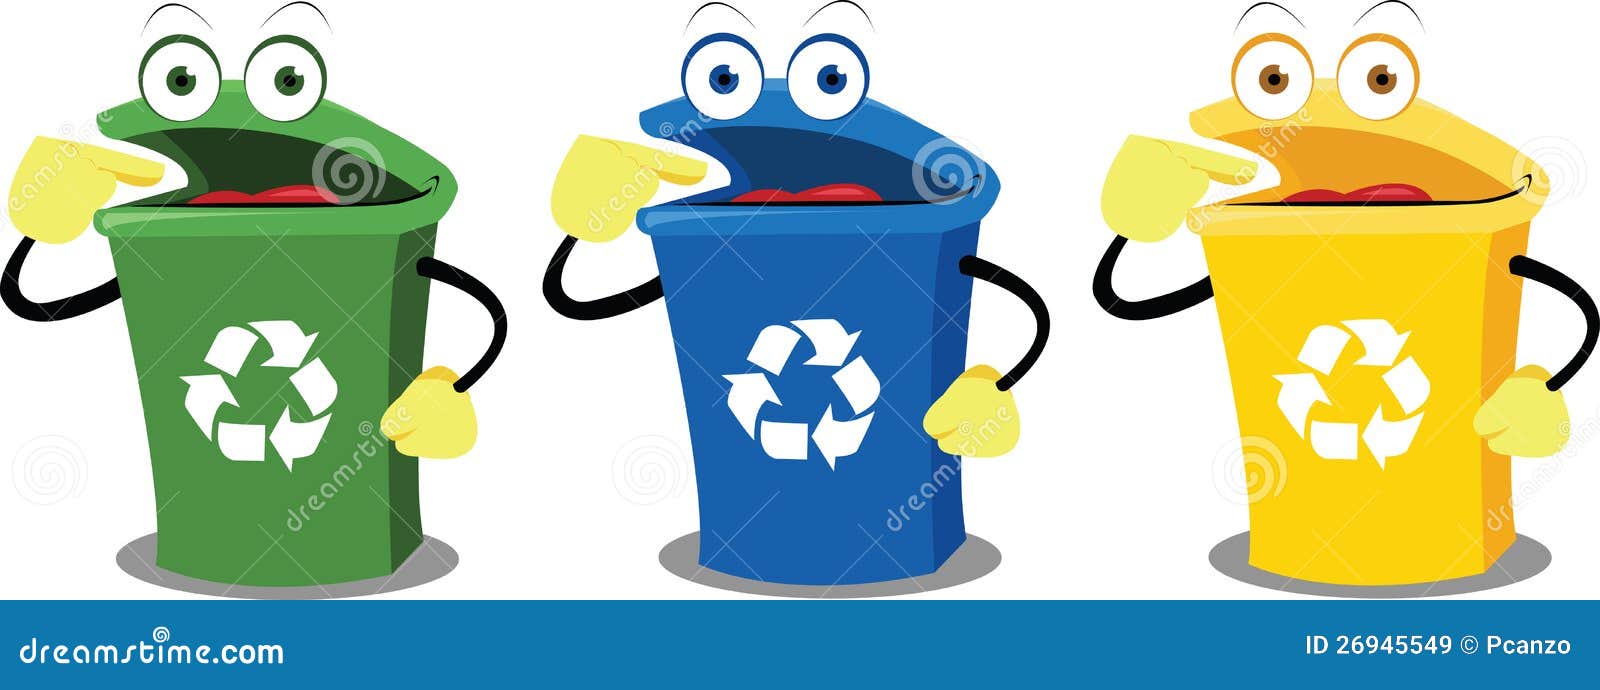 Funny Recycling Boxes Stock Vector Illustration Of Mouth 26945549.